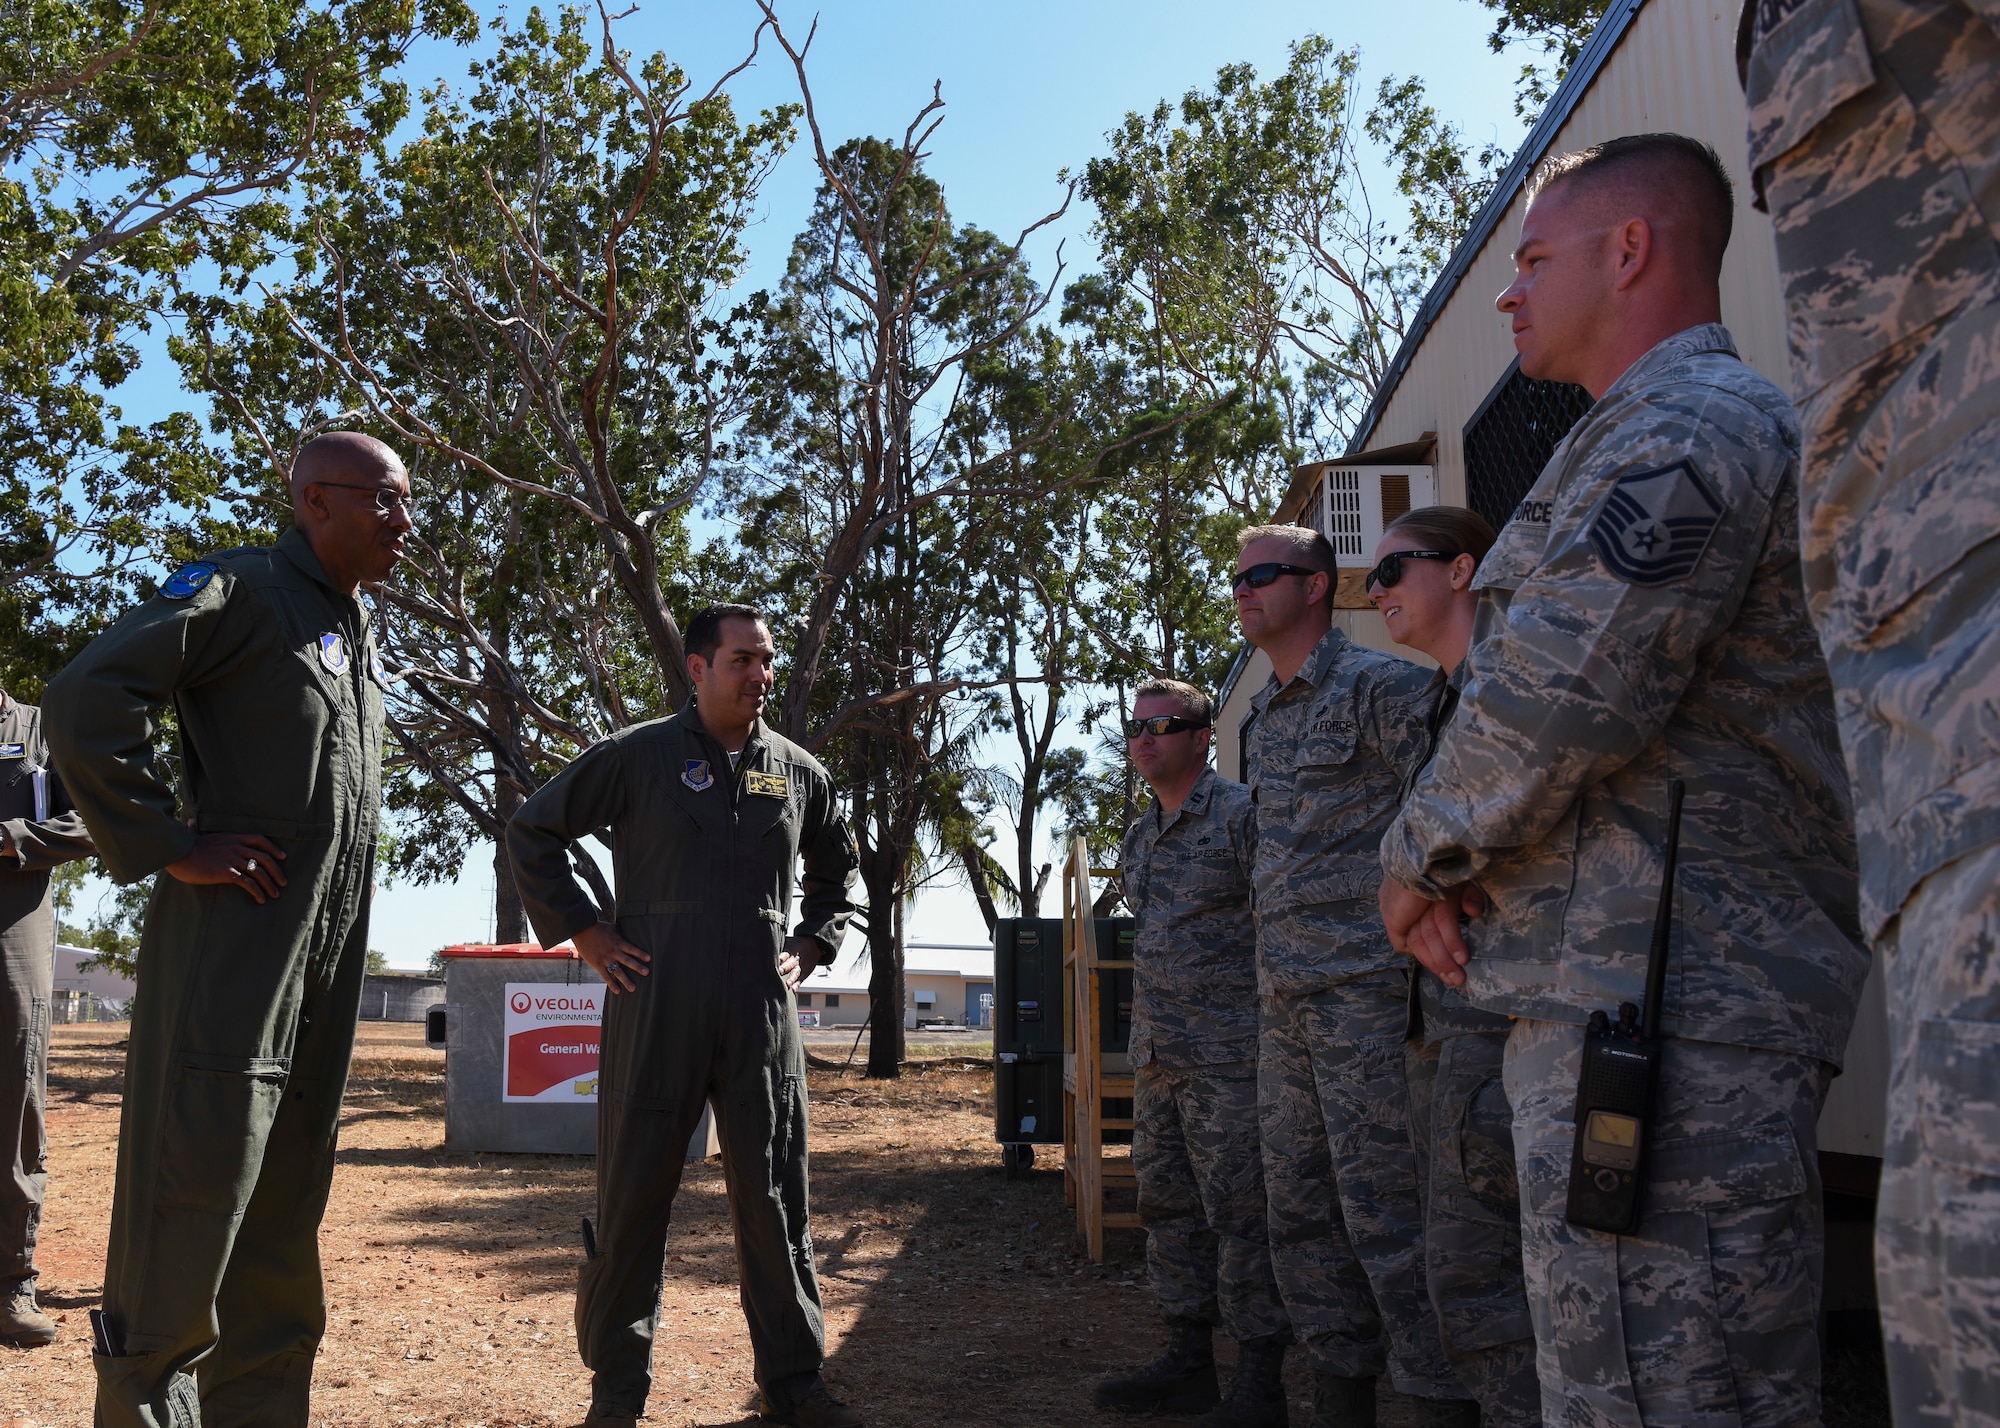 U.S. Air Force Gen. CQ Brown, Jr. (left), Pacific Air Forces commander, and Lt. Col. Joseph Miranda, 80th Fighter Squadron commander, visit with 8th Fighter Wing Airmen from Kunsan Air Base, Republic of Korea, participating in Exercise Pitch Black 2018 at Royal Australian Air Force Base Darwin, Australia, Aug. 13, 2018. Brown visited the exercise to observe first-hand the U.S. involvement in the region and witness the integration with the 15 other participating nations from across the world. (U.S. Air Force photo by Senior Airman Savannah L. Waters)